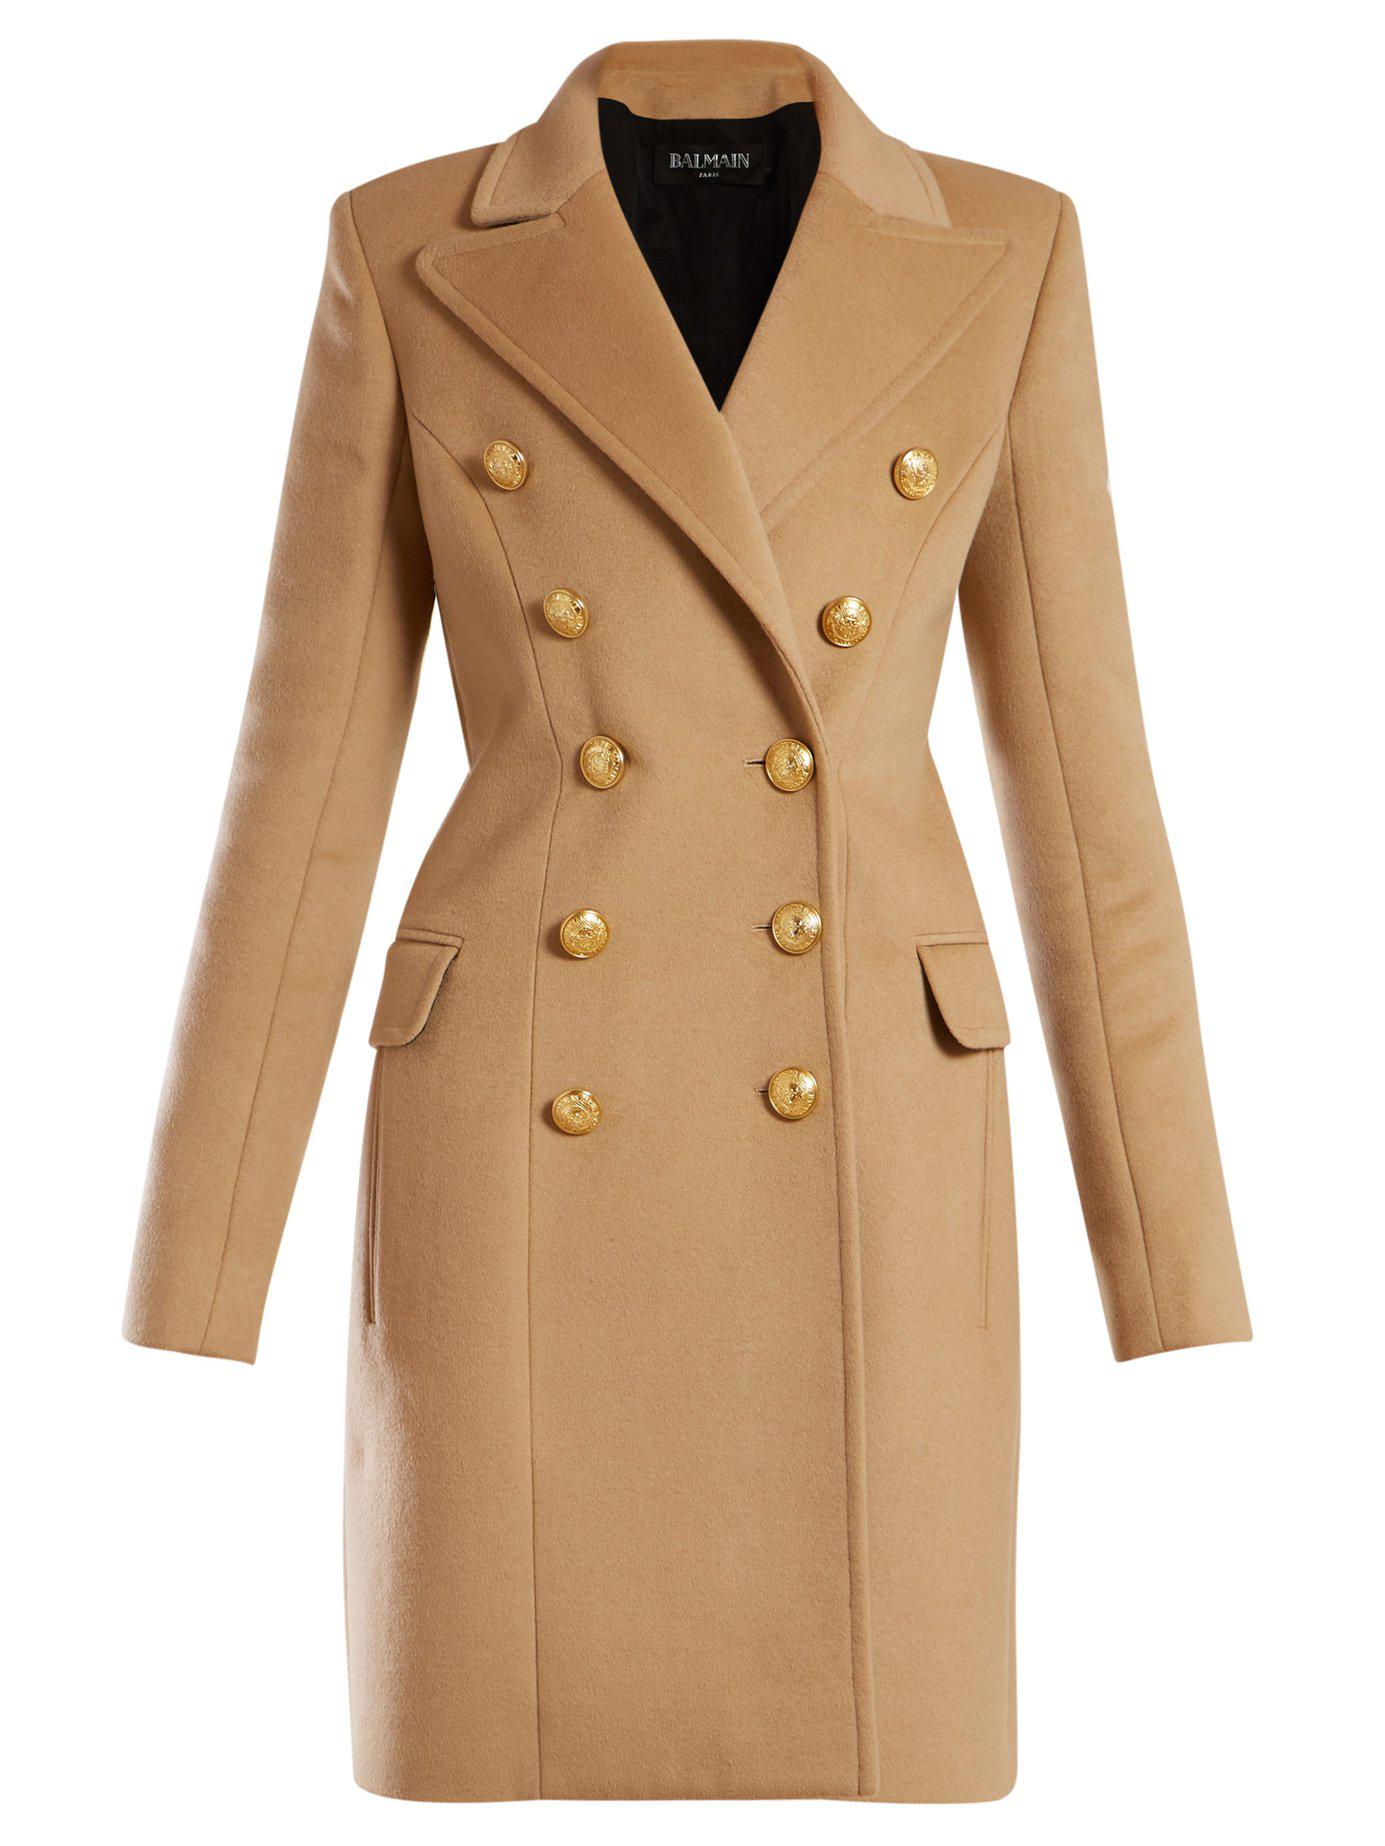 Balmain Double Breasted Wool Coat in Natural | Lyst